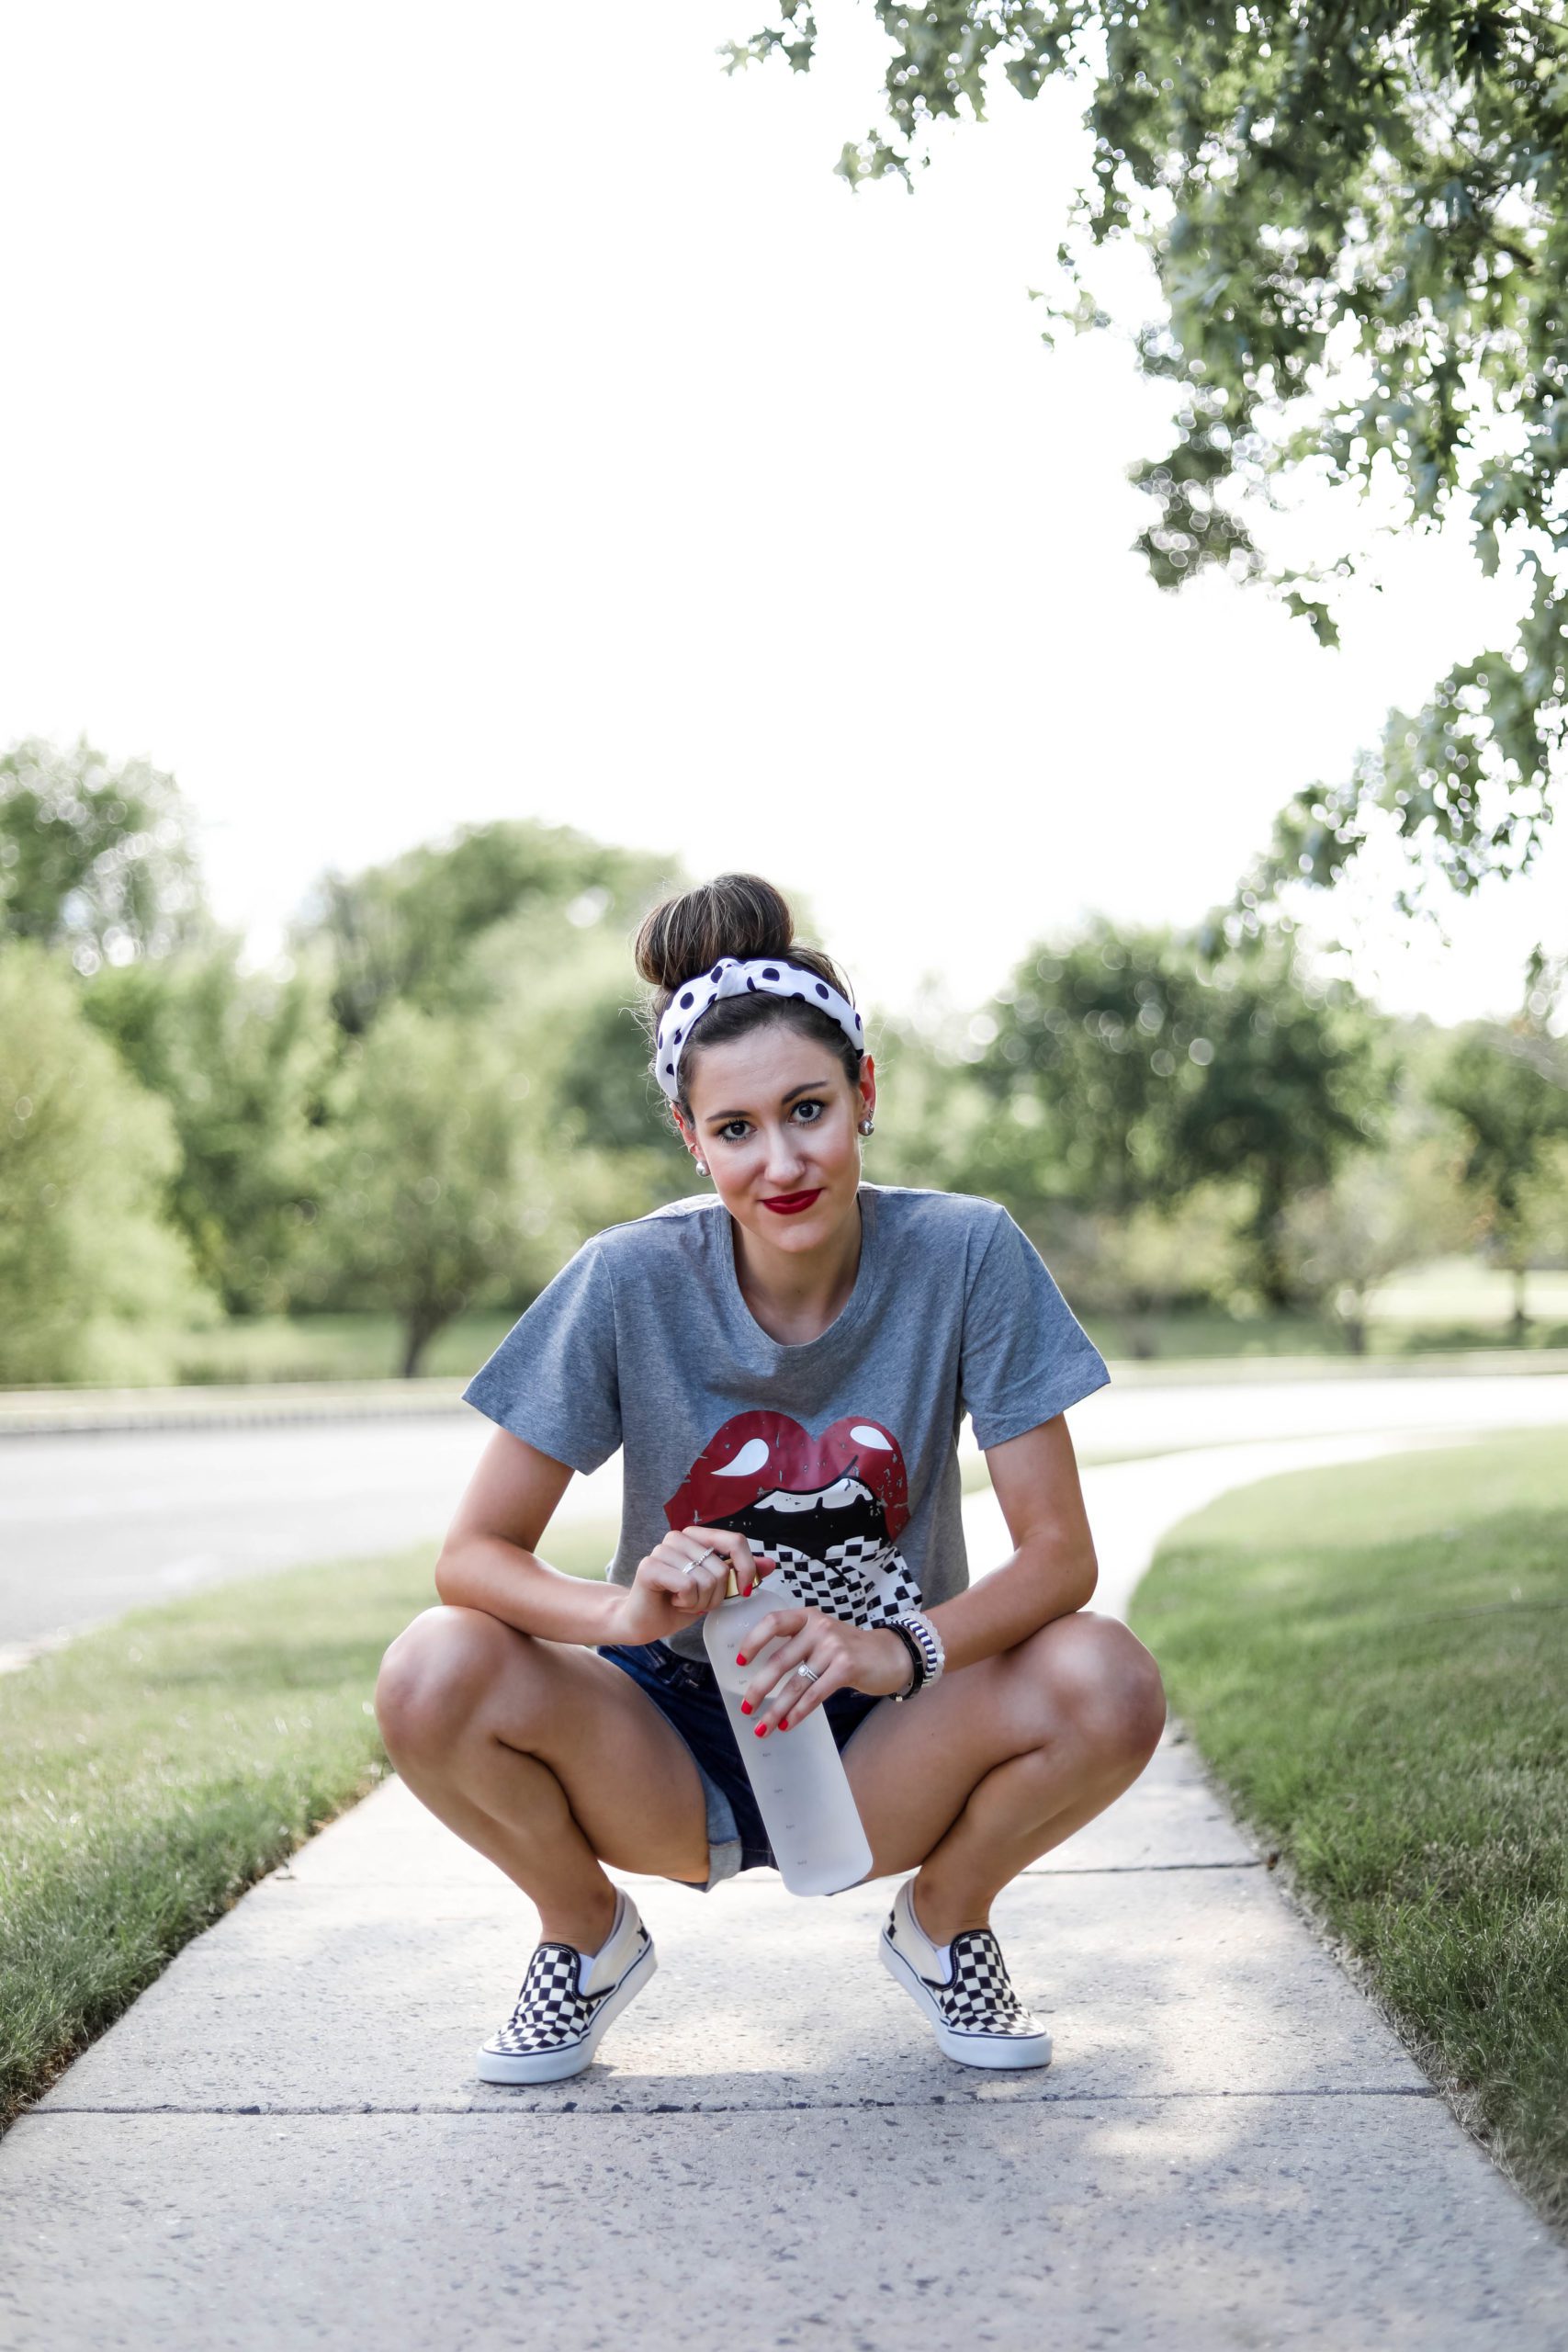 Rolling Stones tongue t-shirt OOTD with American Eagle jean shorts and checkered vans - #AskE Q&A post on Coming Up Roses